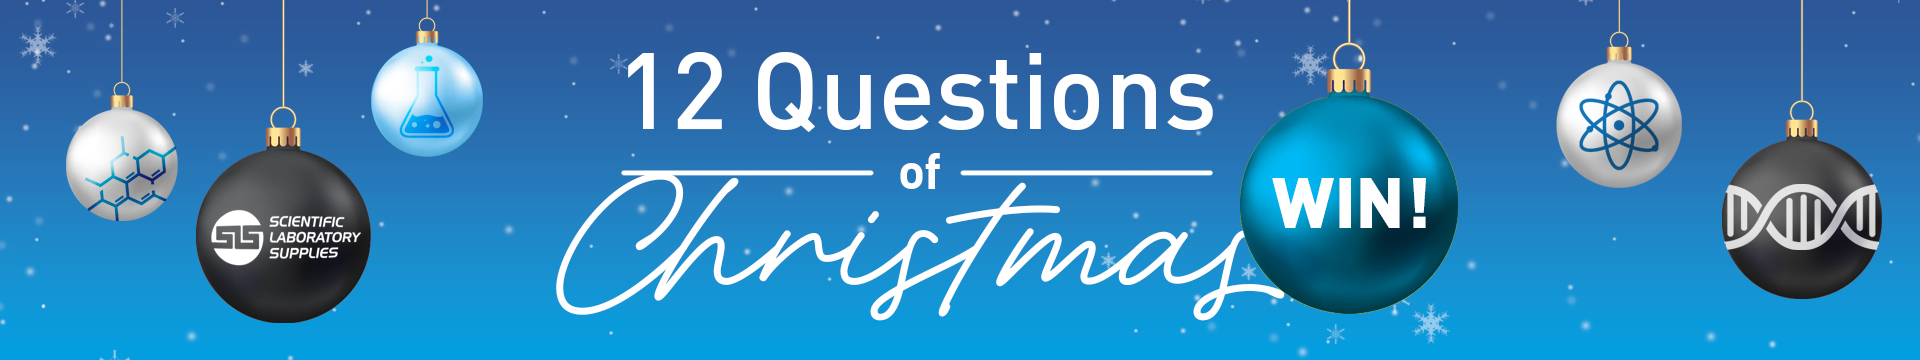 12 Questions of Christmas Competition Banner